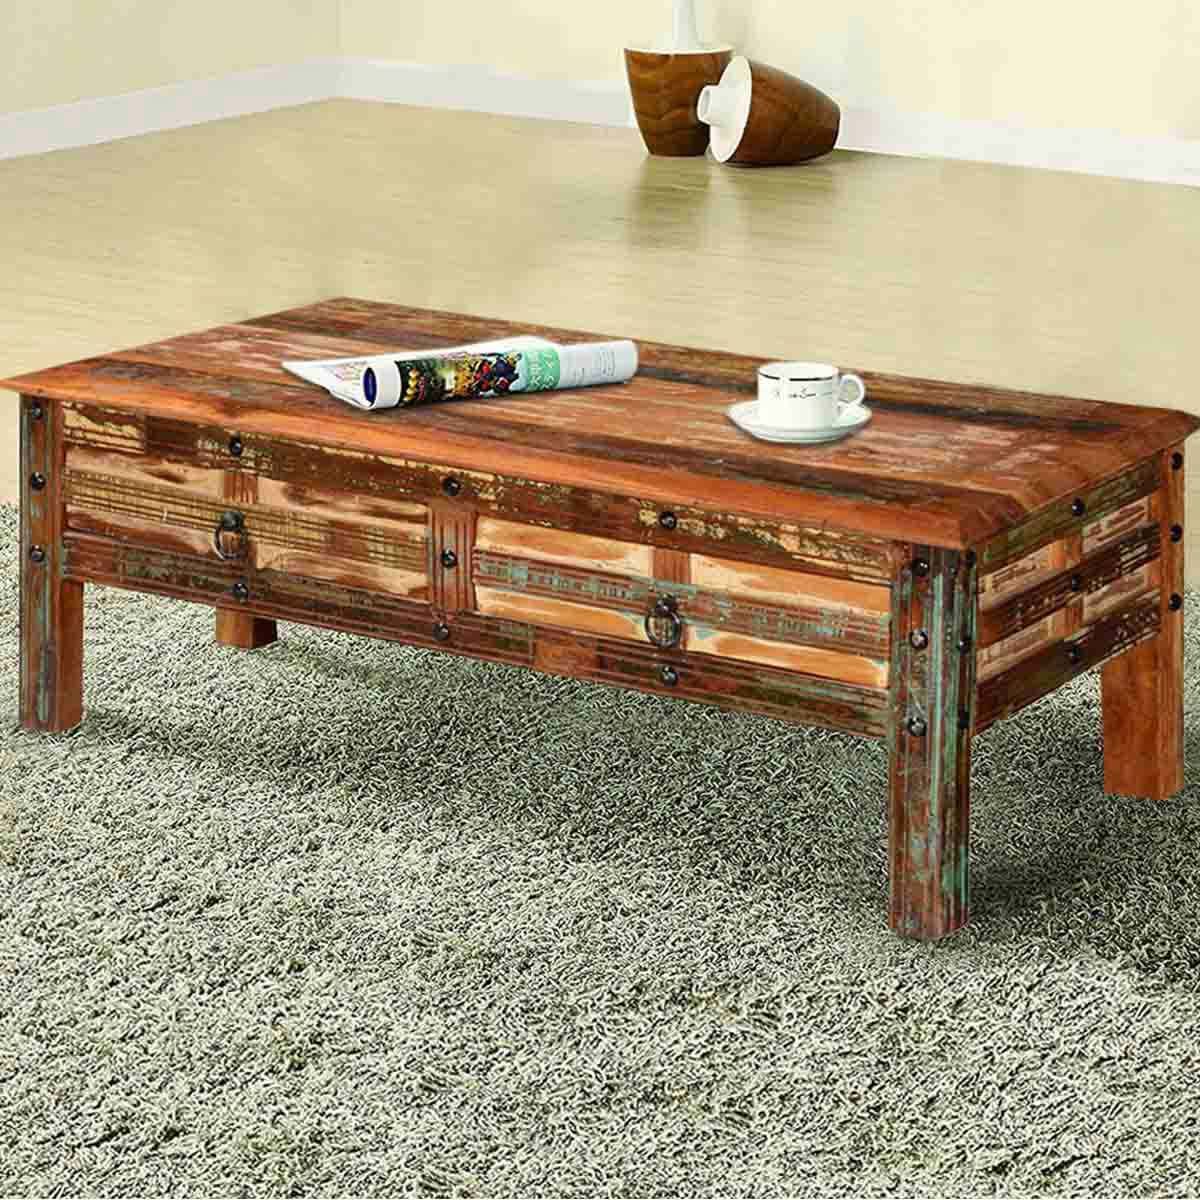 Pioneer Rustic Reclaimed Wood 2 Drawer Coffee Table Pertaining To 2 Drawer Coffee Tables (Gallery 19 of 20)